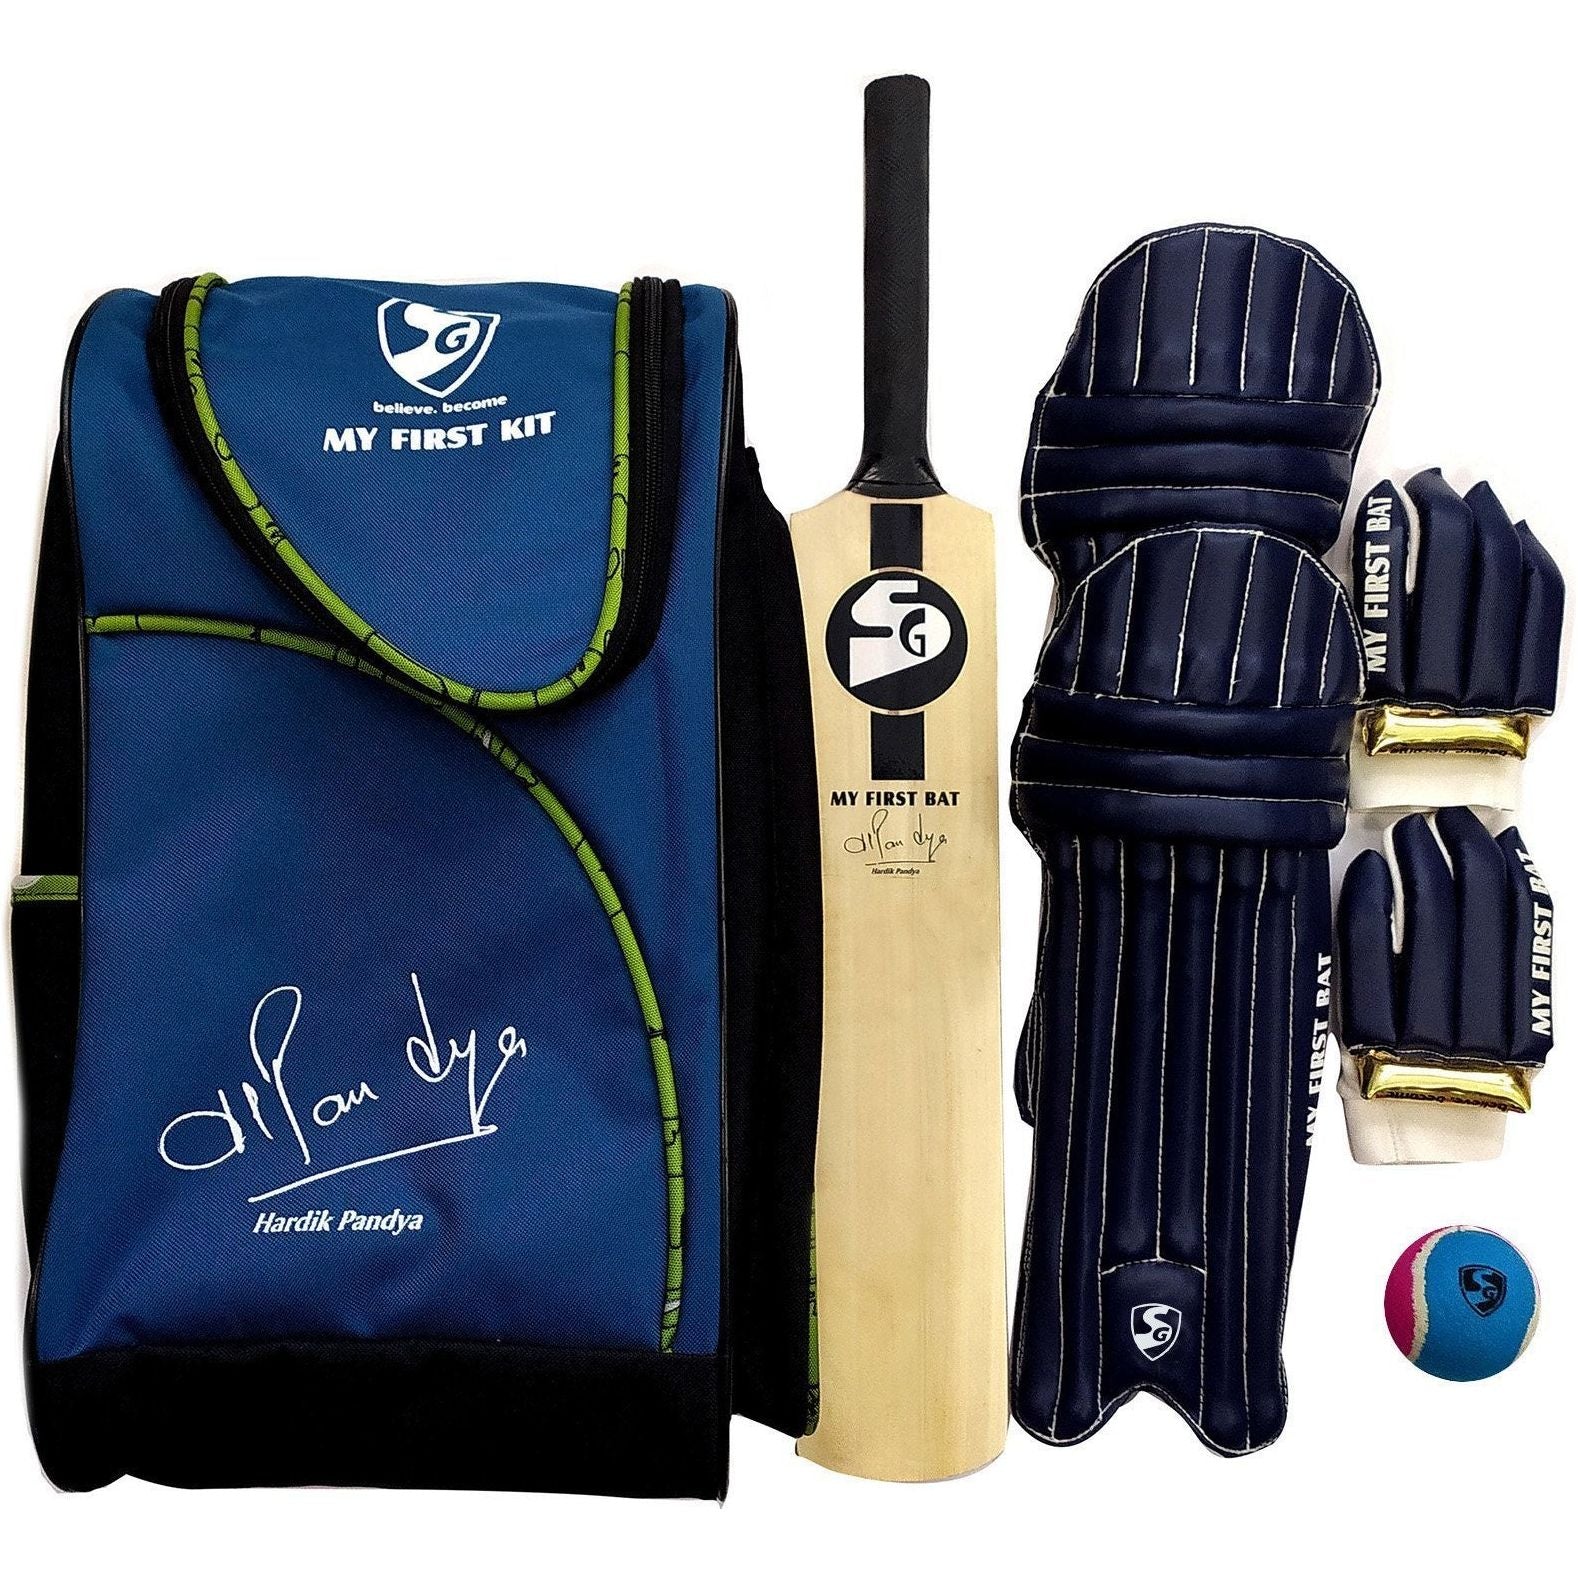 SG My First Kit Junior / Youth Cricket Set for 6 to 8 Years Old